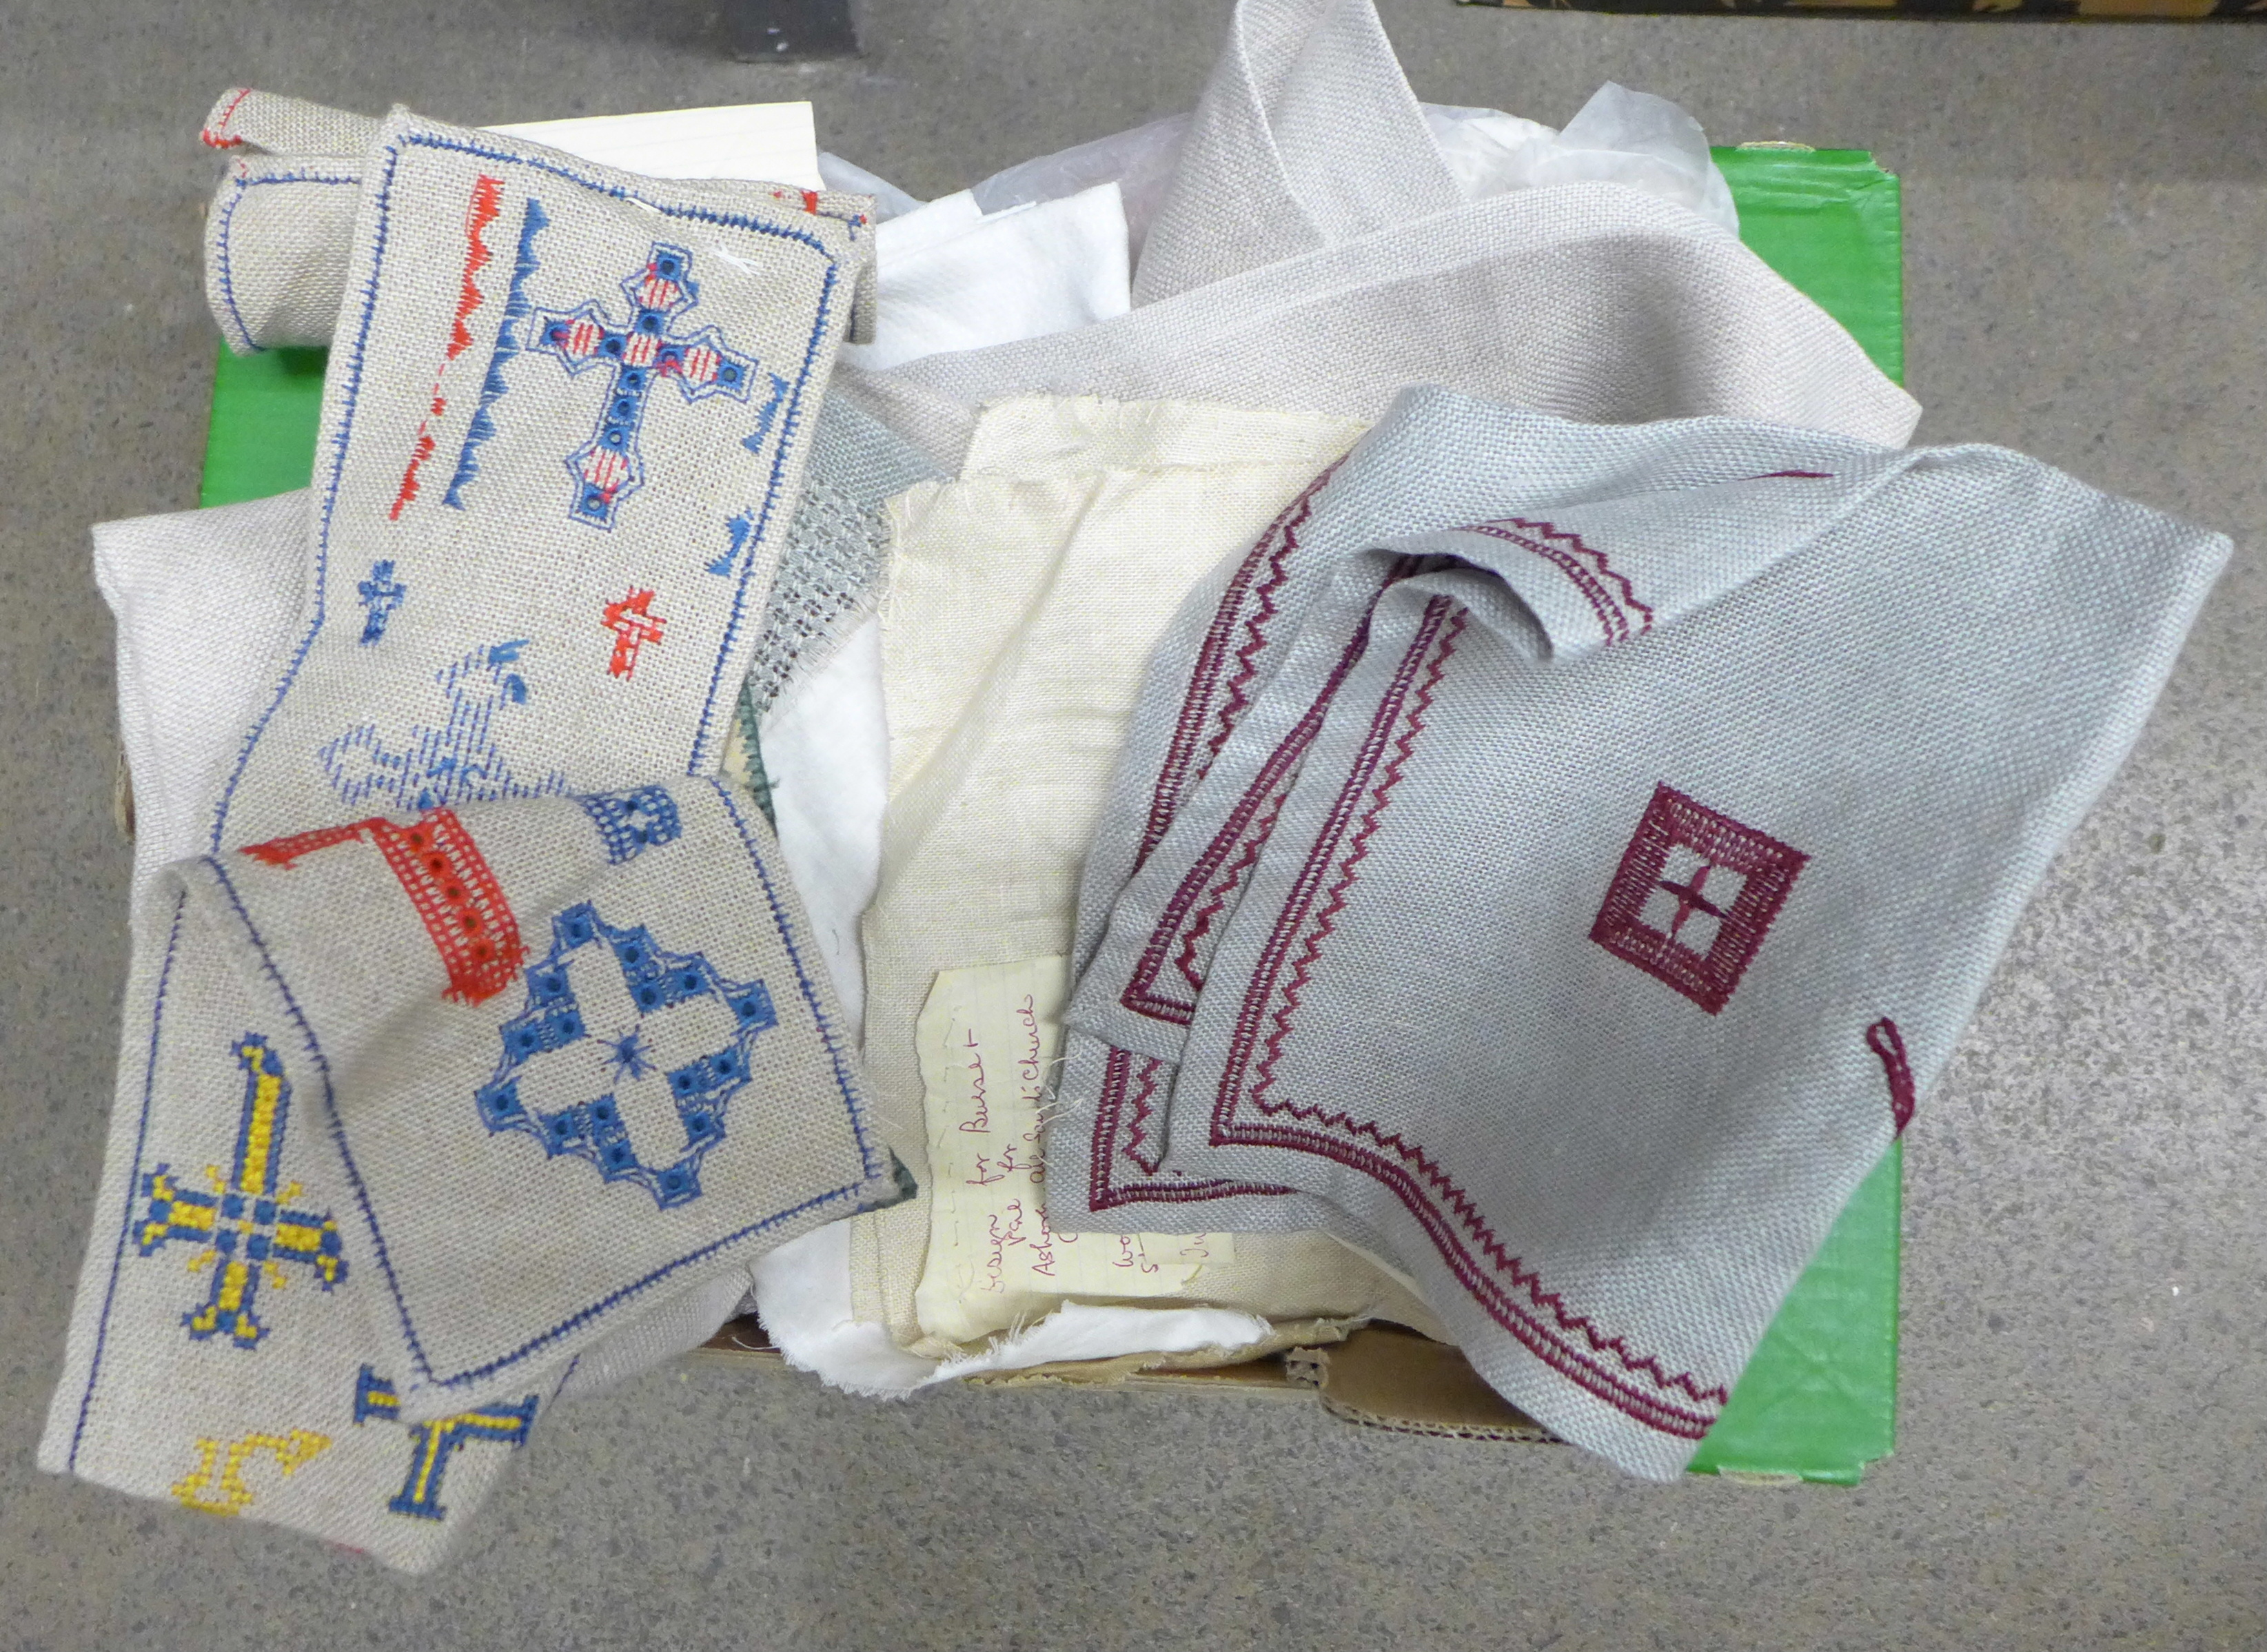 A collection of hand embroidered linens and needleworks